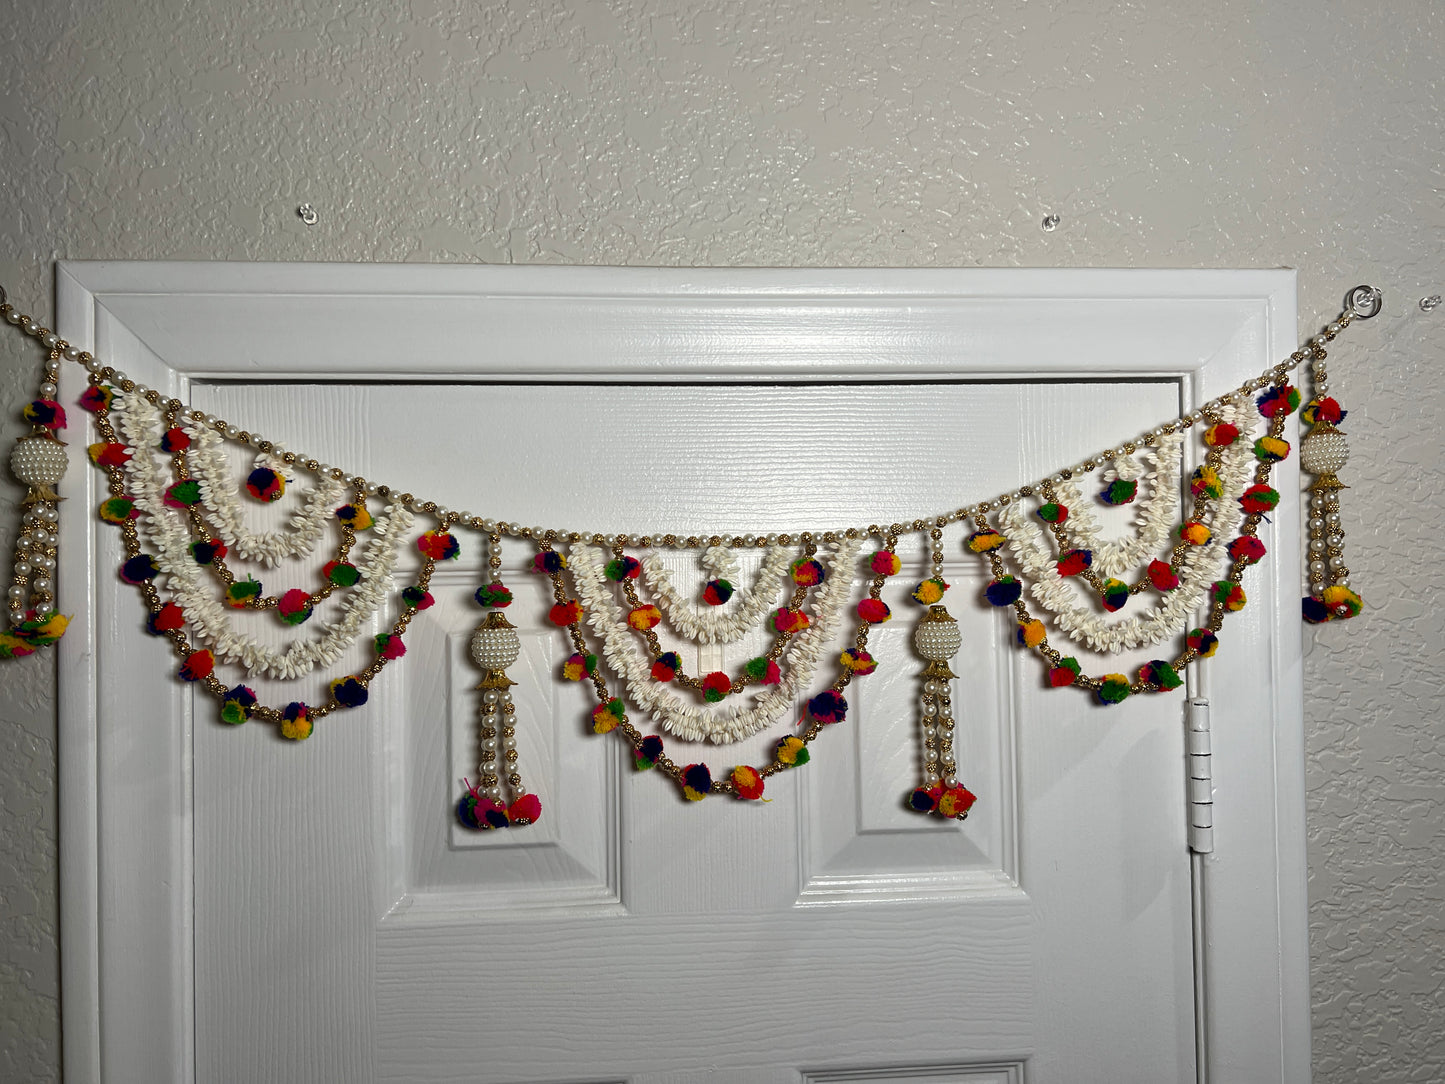 Door Toran Set Decorative Door Hanging Bandanwar for Home Festival Entrance for New Year Decorations with Moti Beads Multicolor PomPom